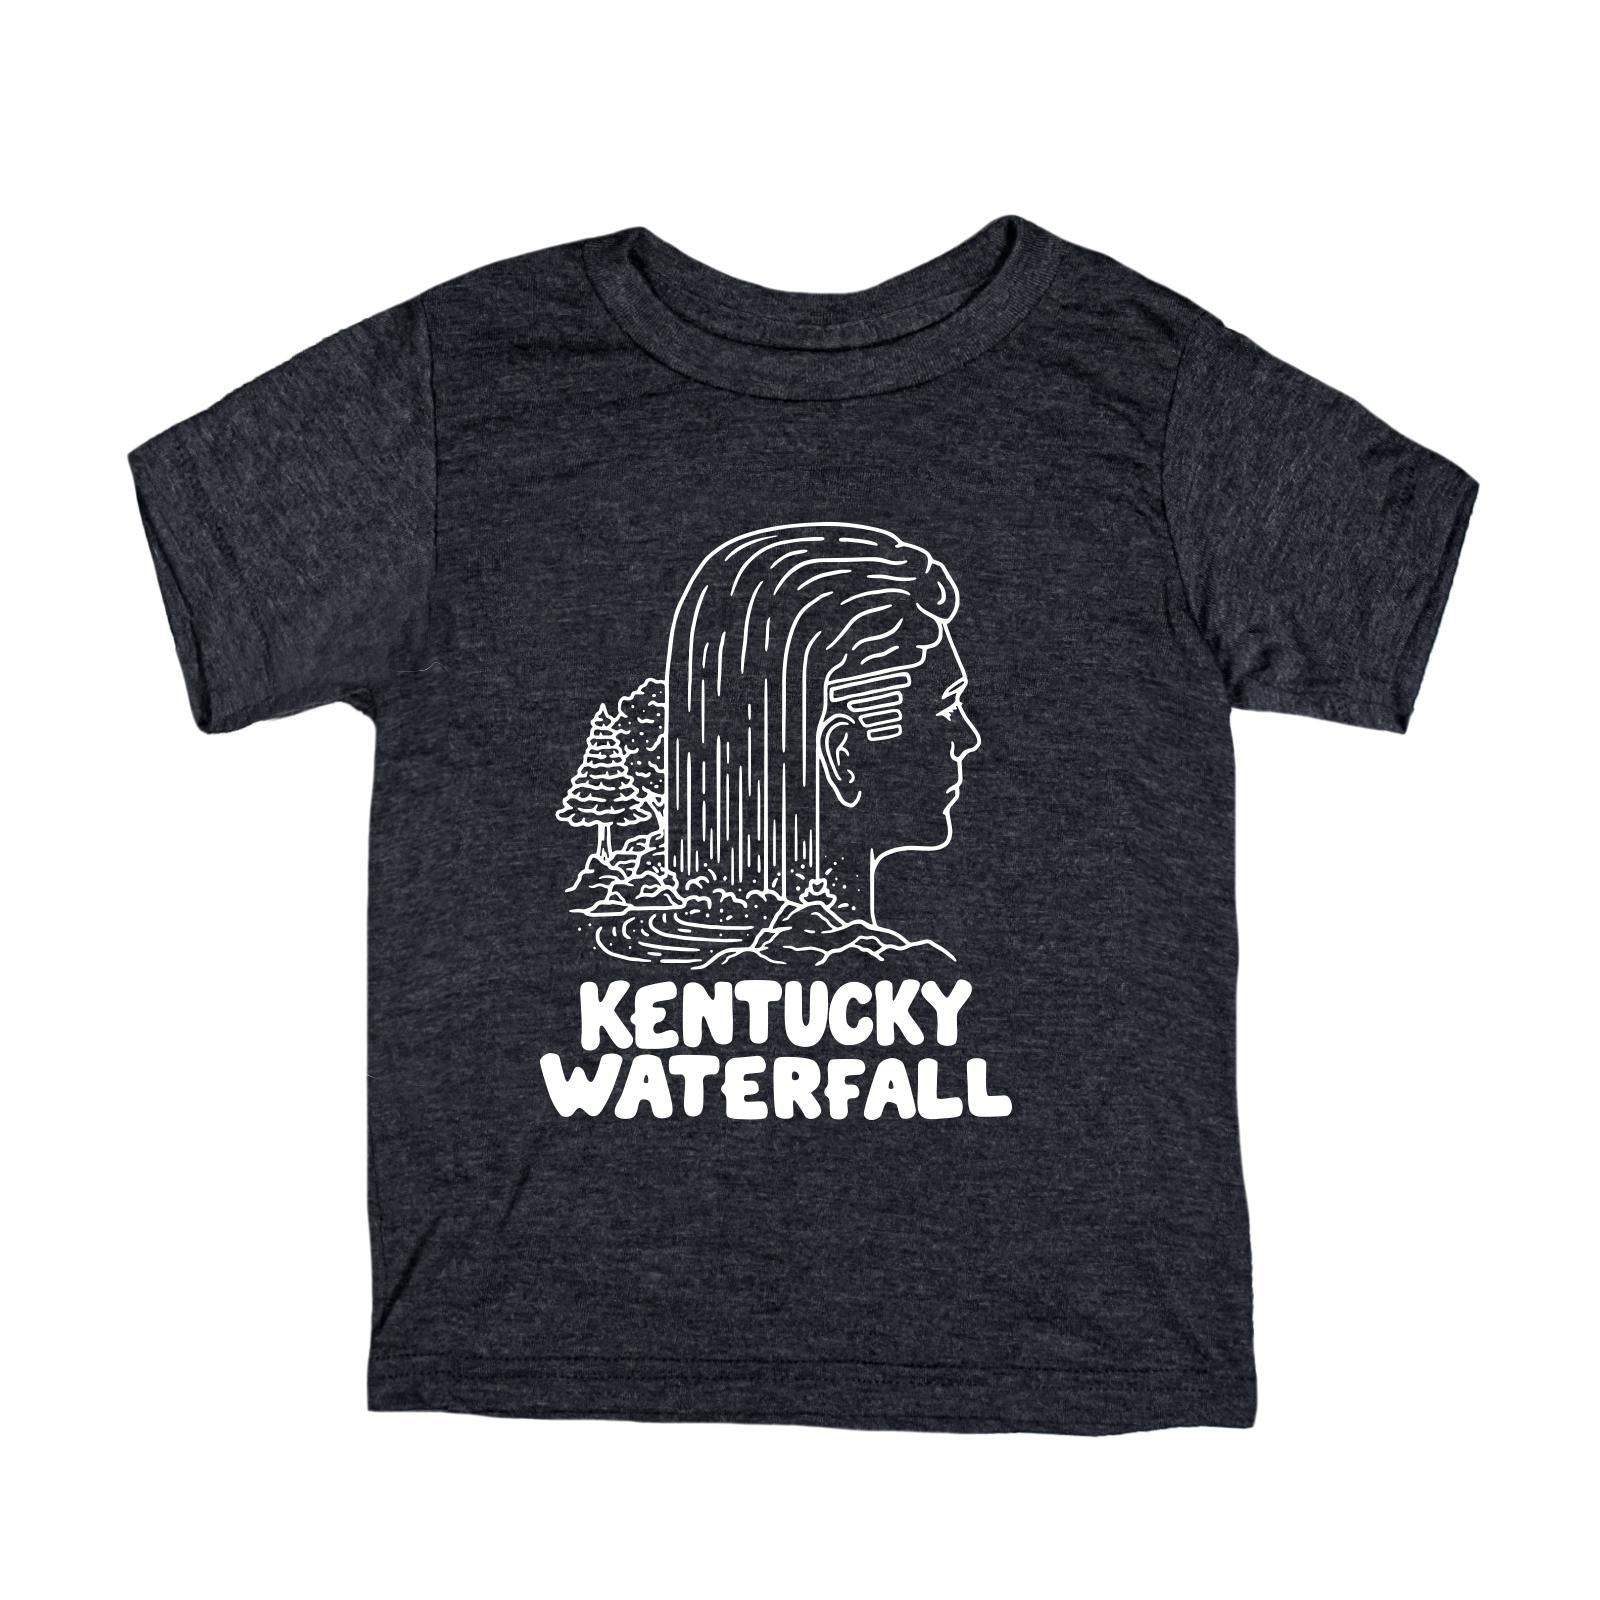 KY Waterfall Kids T-Shirt-Kids-KY for KY Store